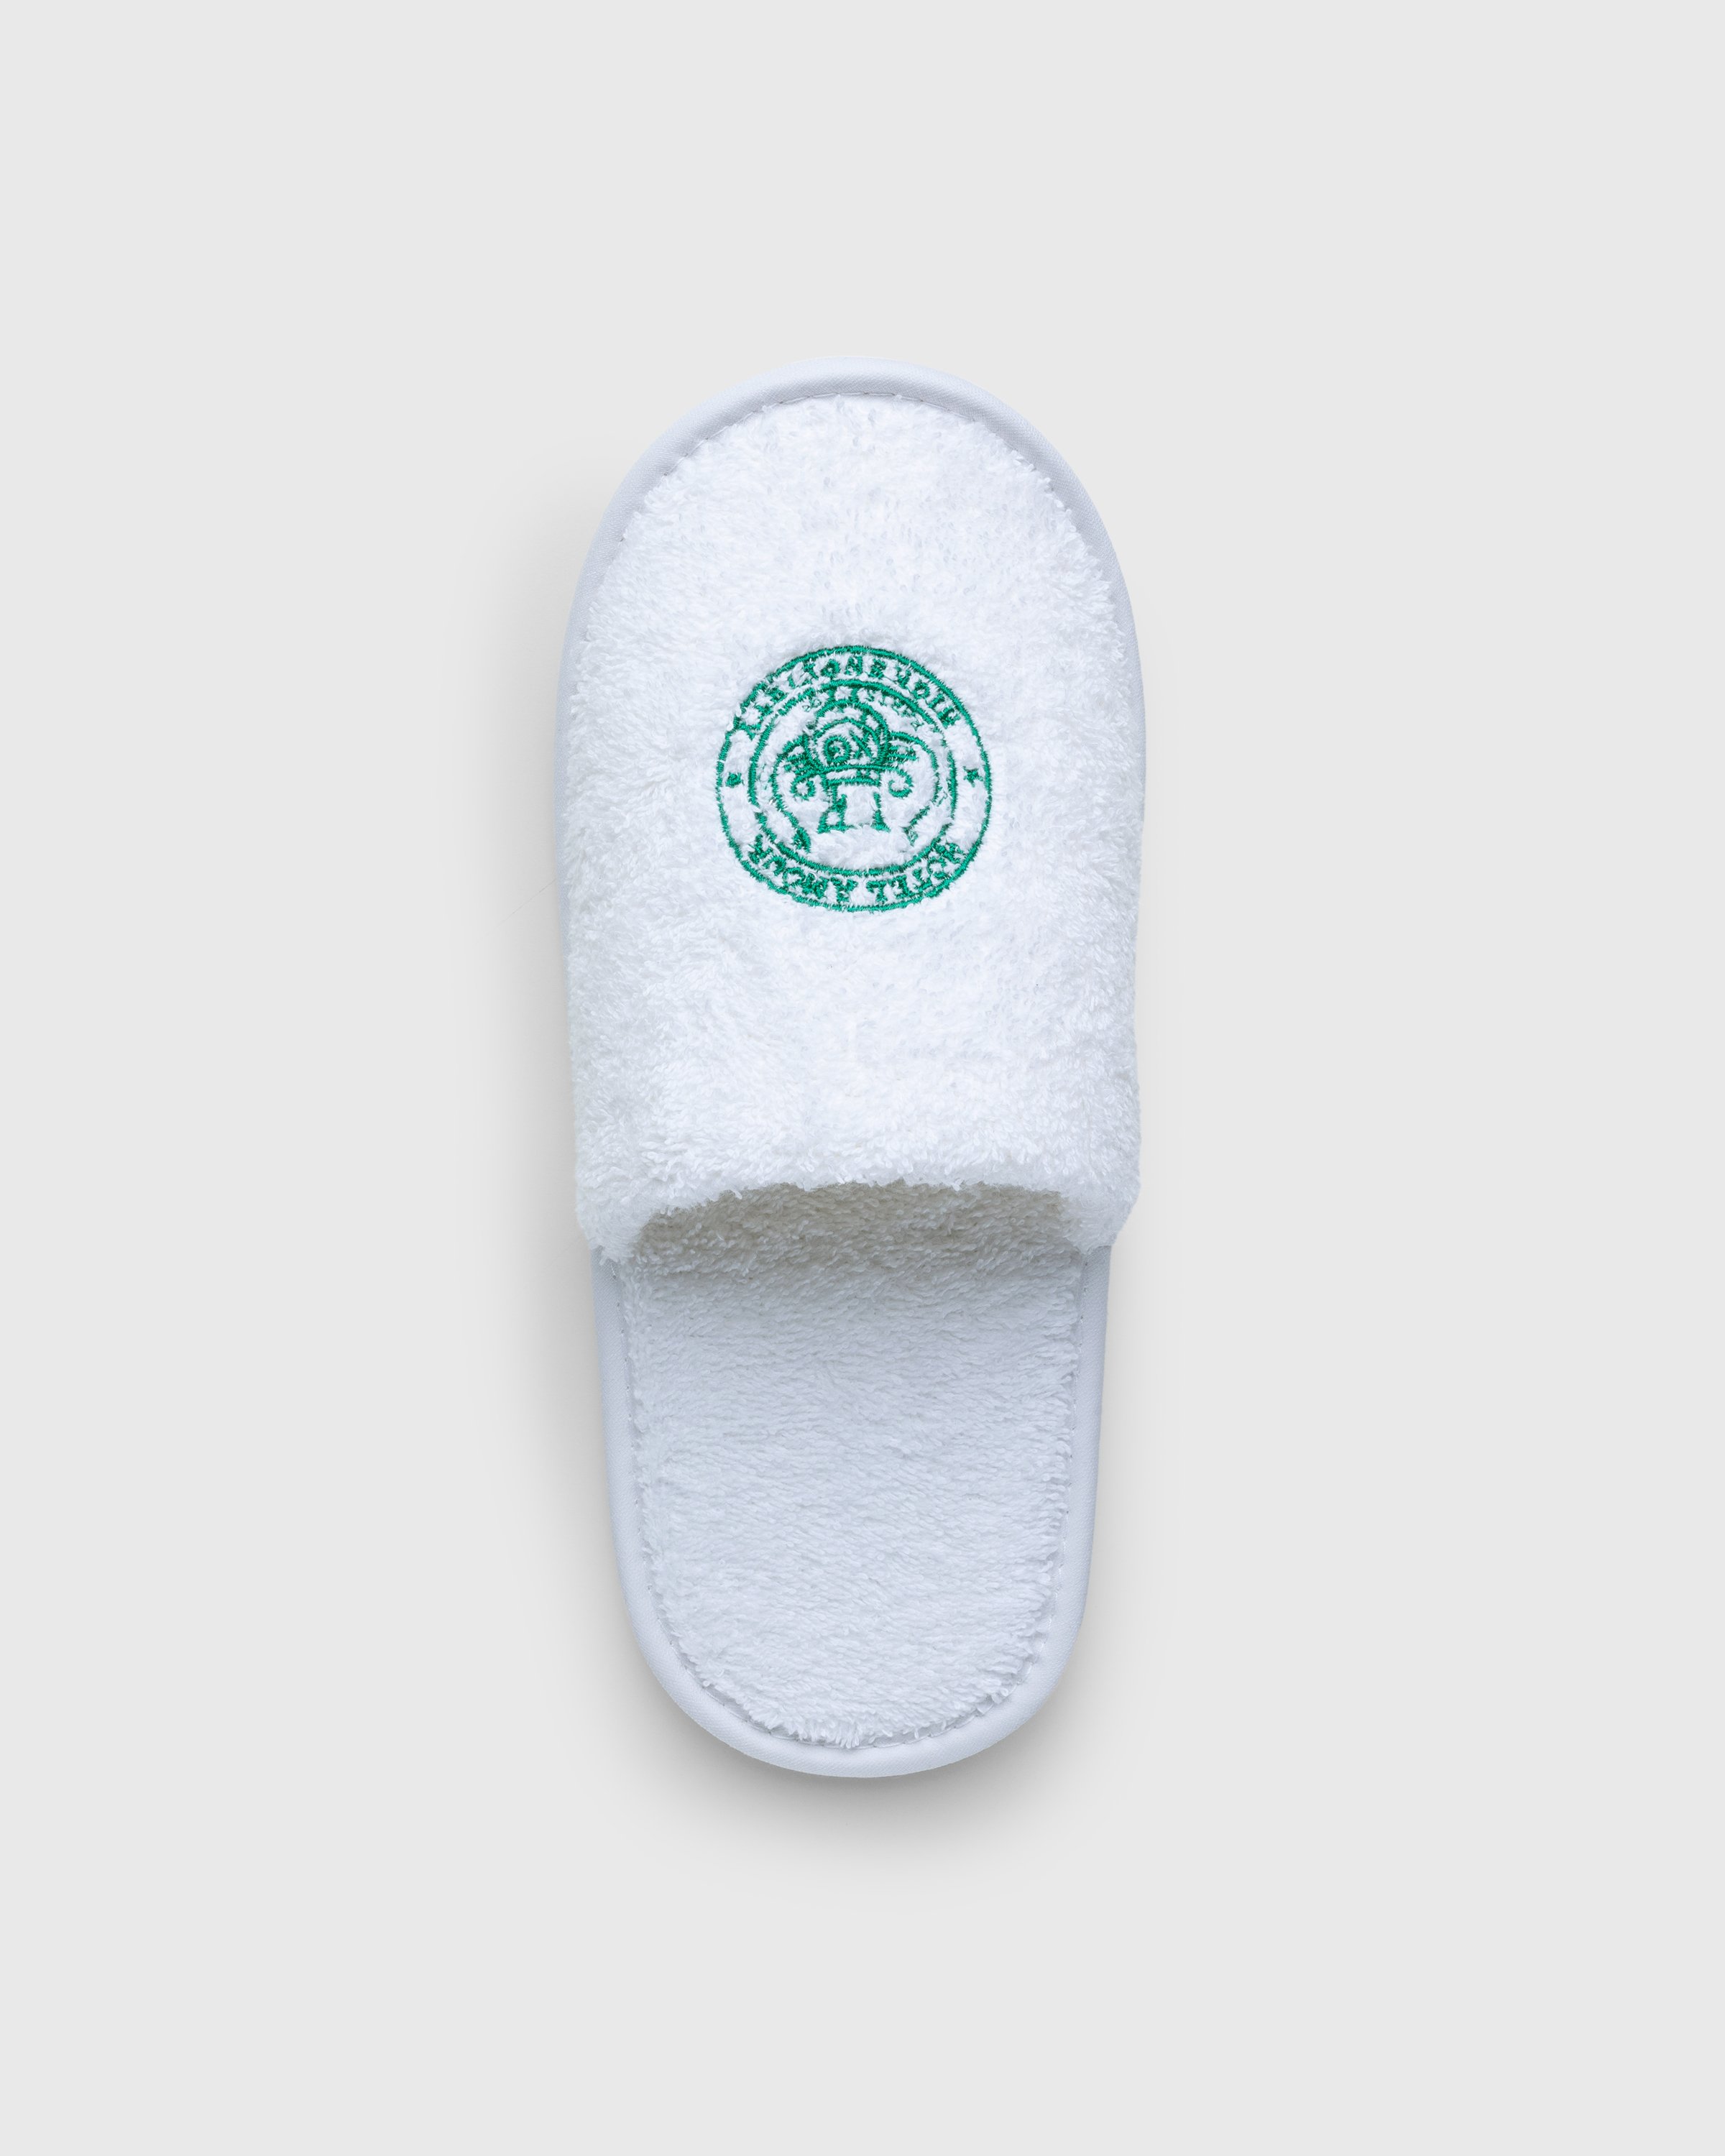 Hotel Amour x Highsnobiety - Not In Paris 4 Slippers White - Footwear - White - Image 1